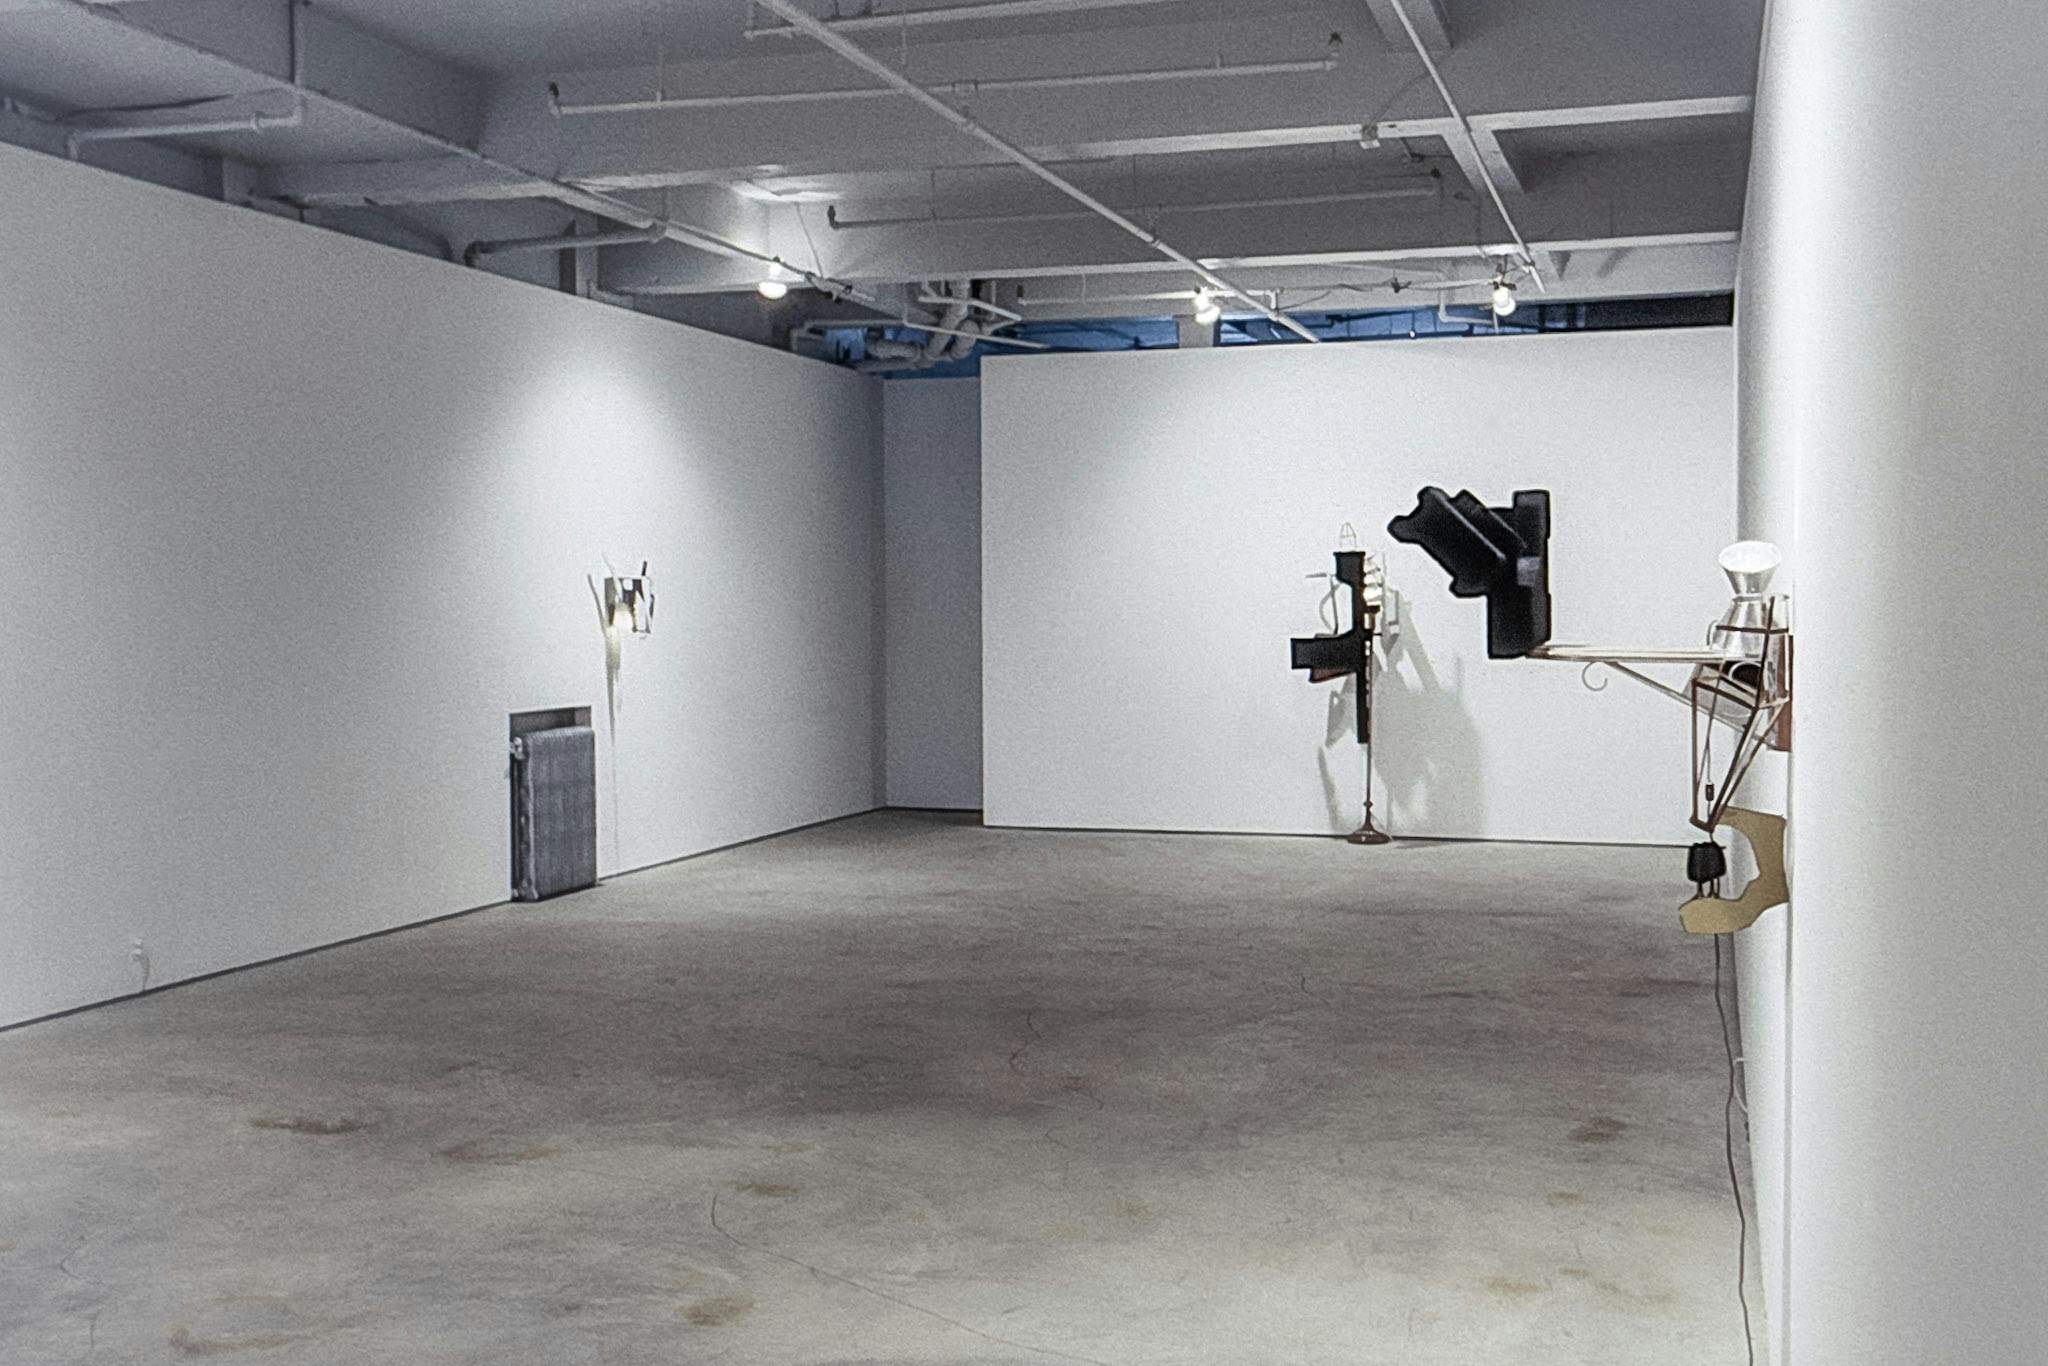 A gallery space with 3 small sculptures on the walls. They all have different metal elements, including a plant hood, a lamp base, and metal sheets that are cut and bent. 